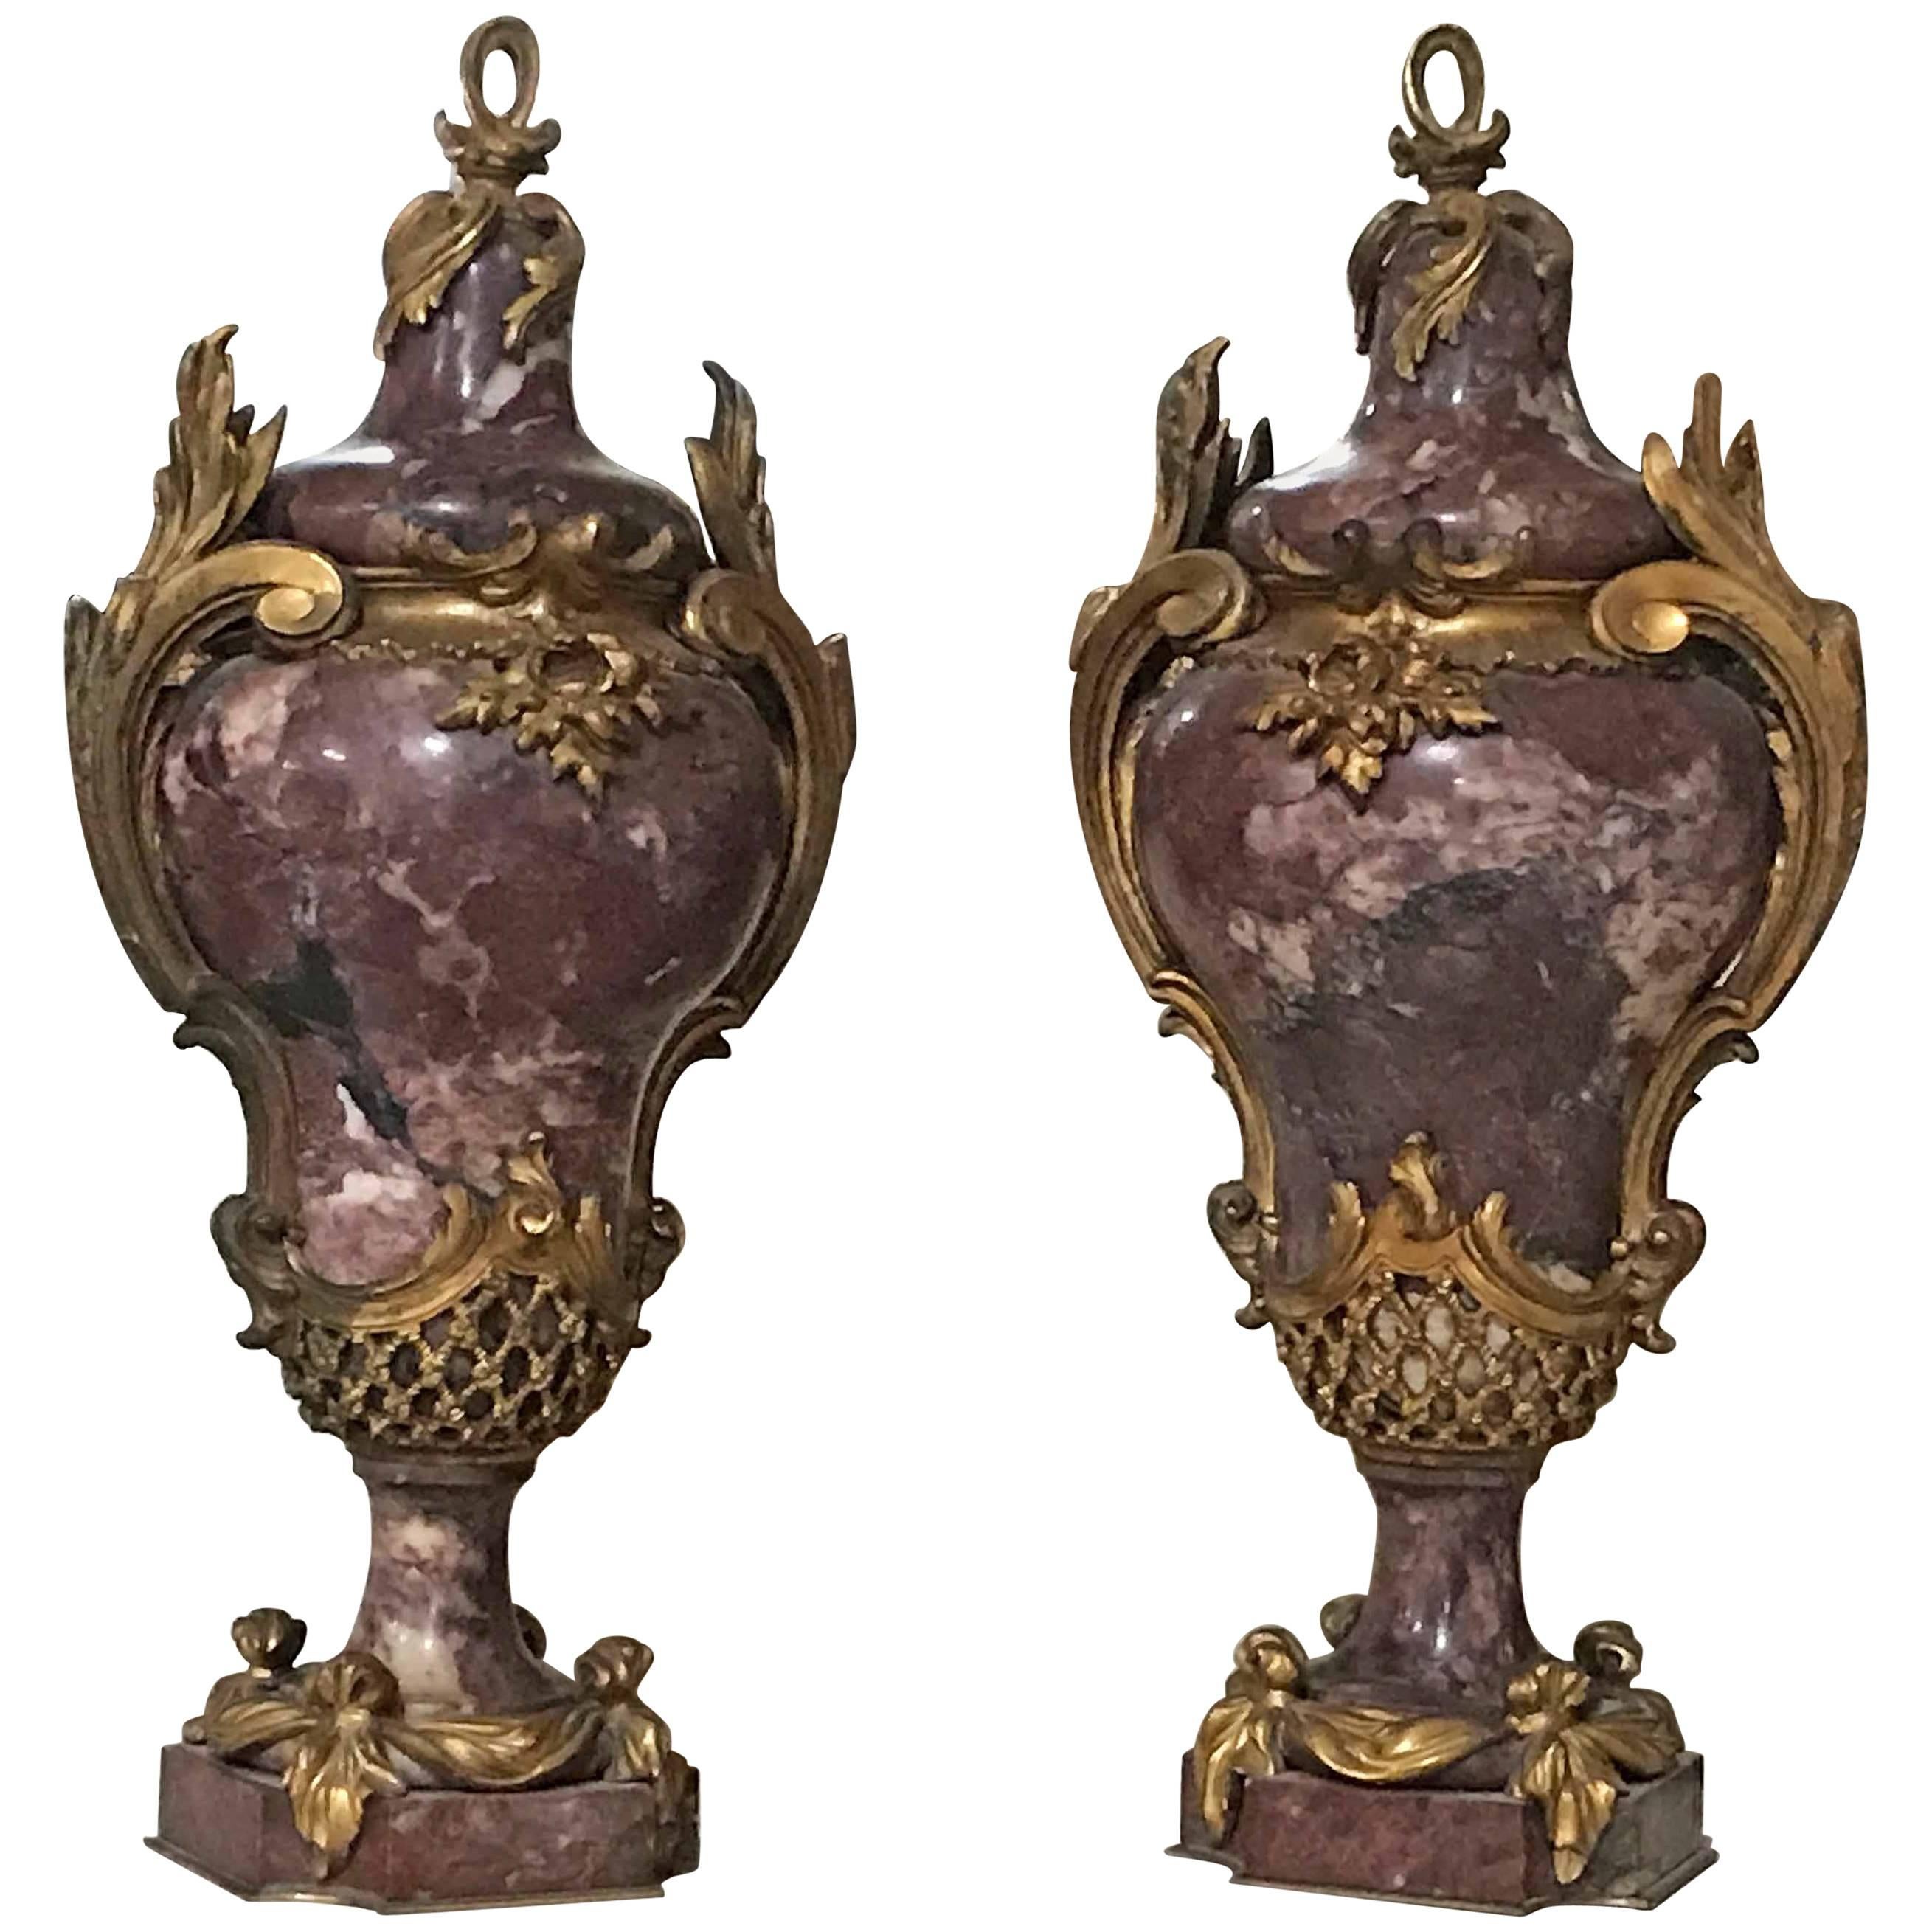 Pair of Bronze and Marble Cassolettes, circa 1820